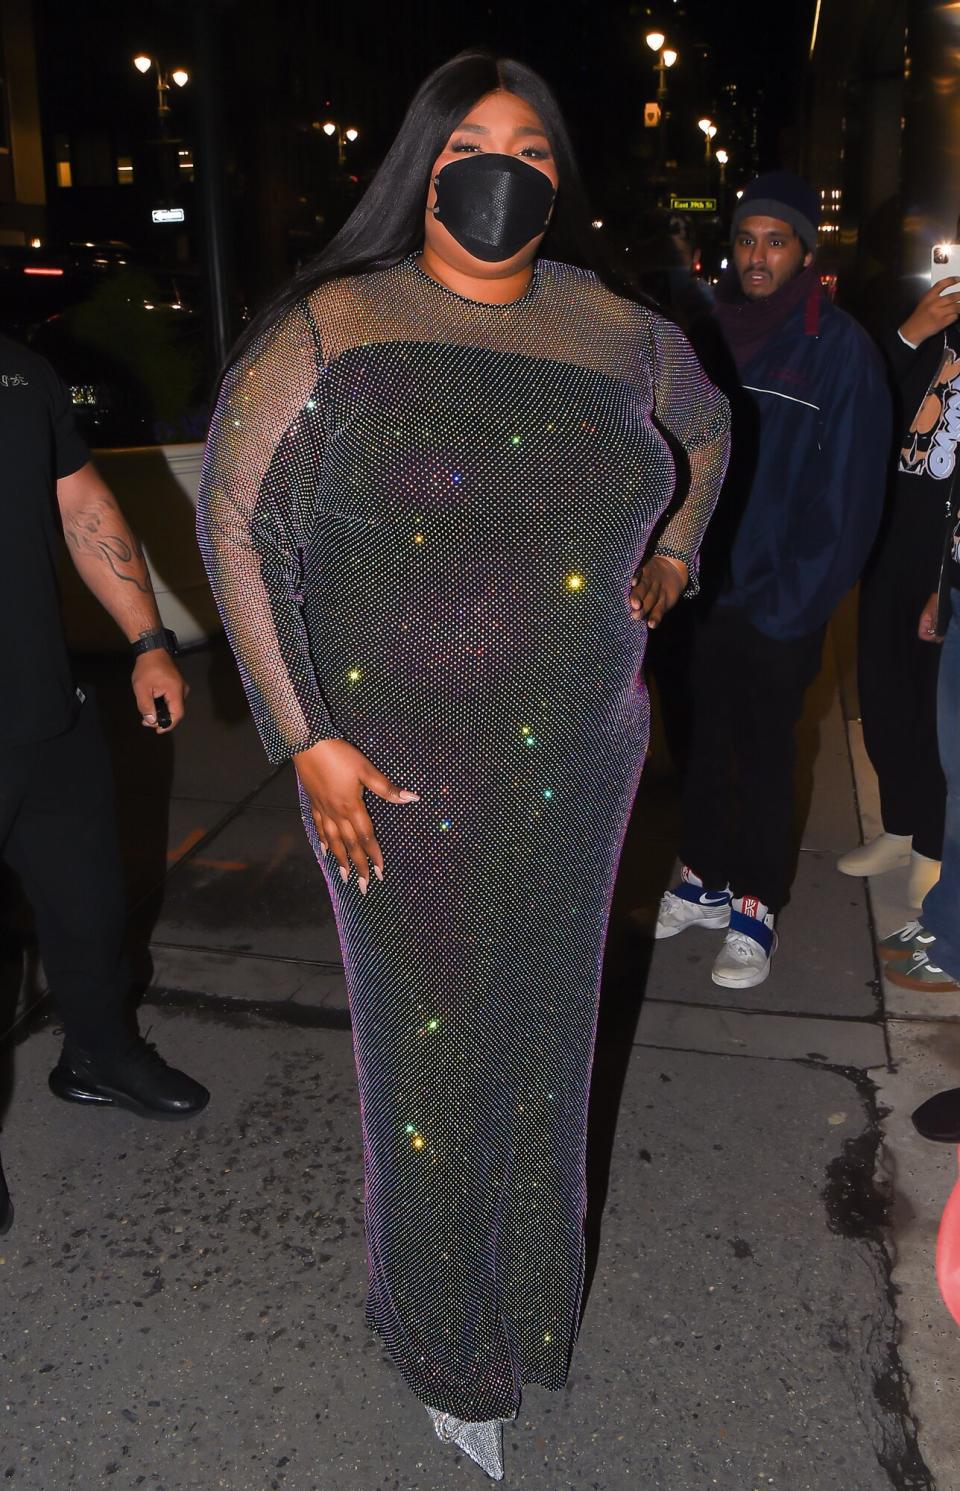 Lizzo arrives to the SNL after party in Manhattan on April 16, 2022 in New York City